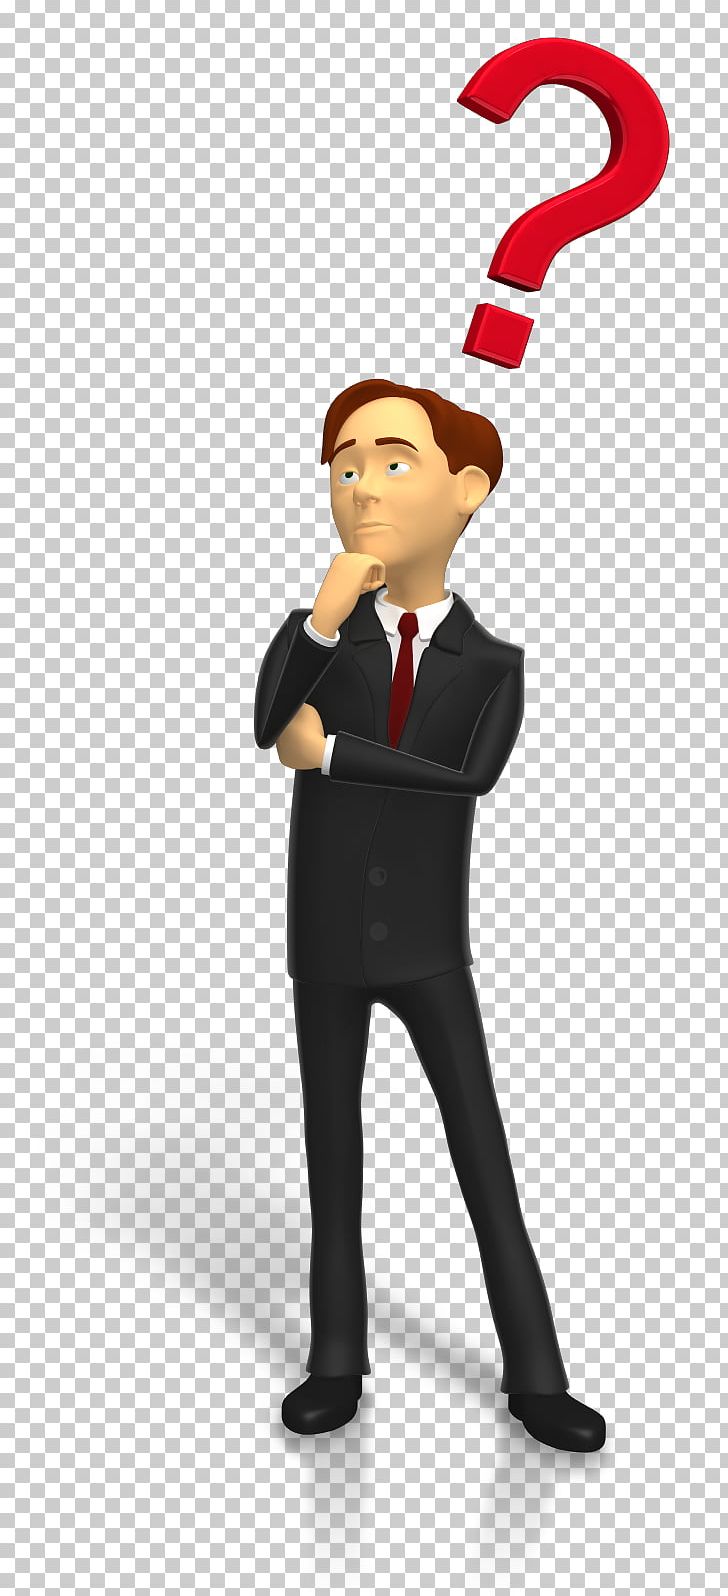 PowerPoint Animation Presentation Stick Figure PNG, Clipart, Animation, Businessperson, Cartoon, Clip Art, Computer Animation Free PNG Download